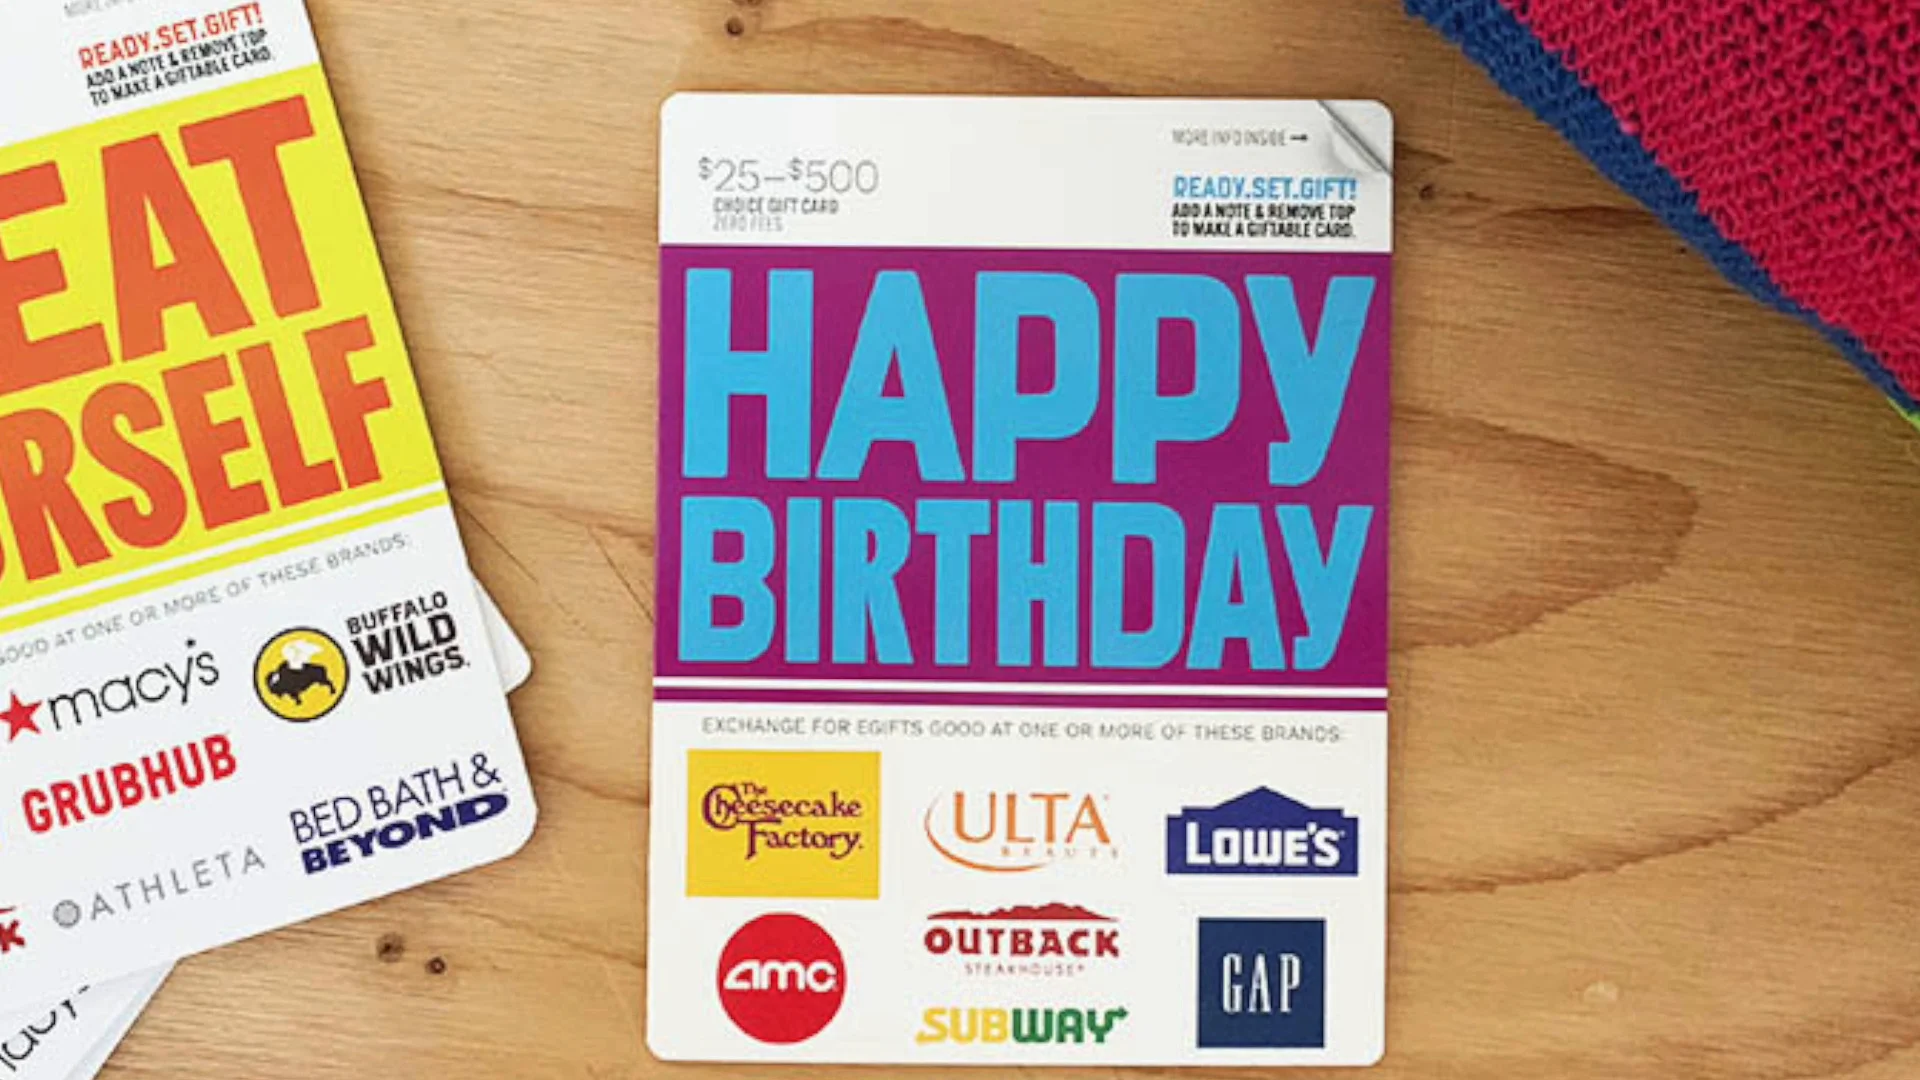 Birthday Gift Cards - Customize a Visa Gift Card